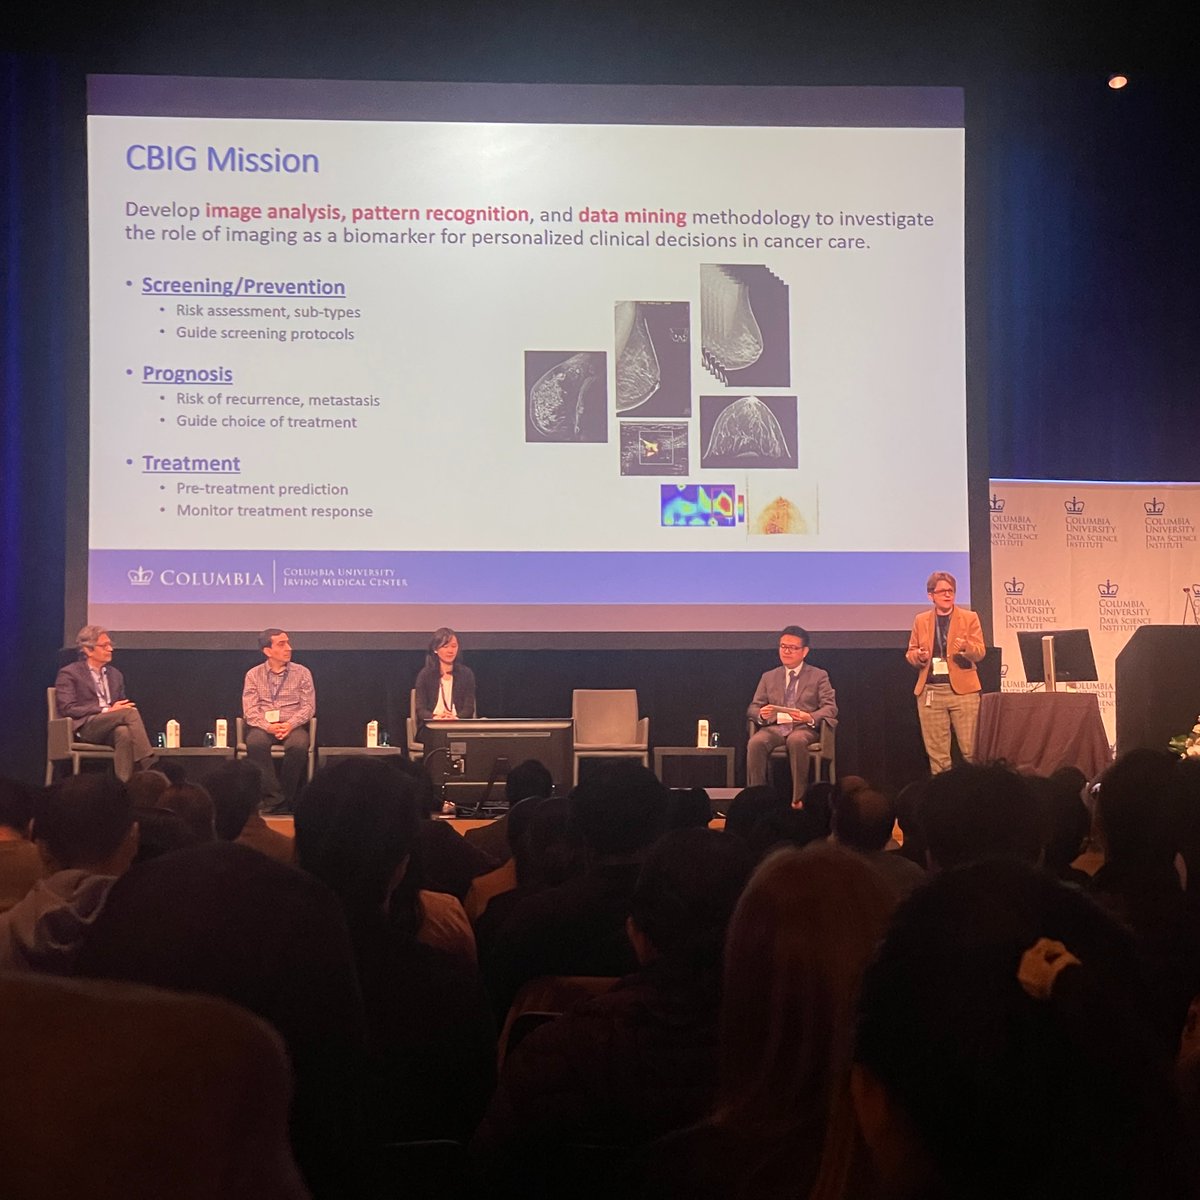 Despina Kontos, Professor @ColumbiaPS, is discussing 'Radiomics, Radiogenomics, and AI' in cancer care. Explore the role of imaging biomarkers in precision medicine. #Radiomics #PrecisionMedicine #CancerCare #DSD2024